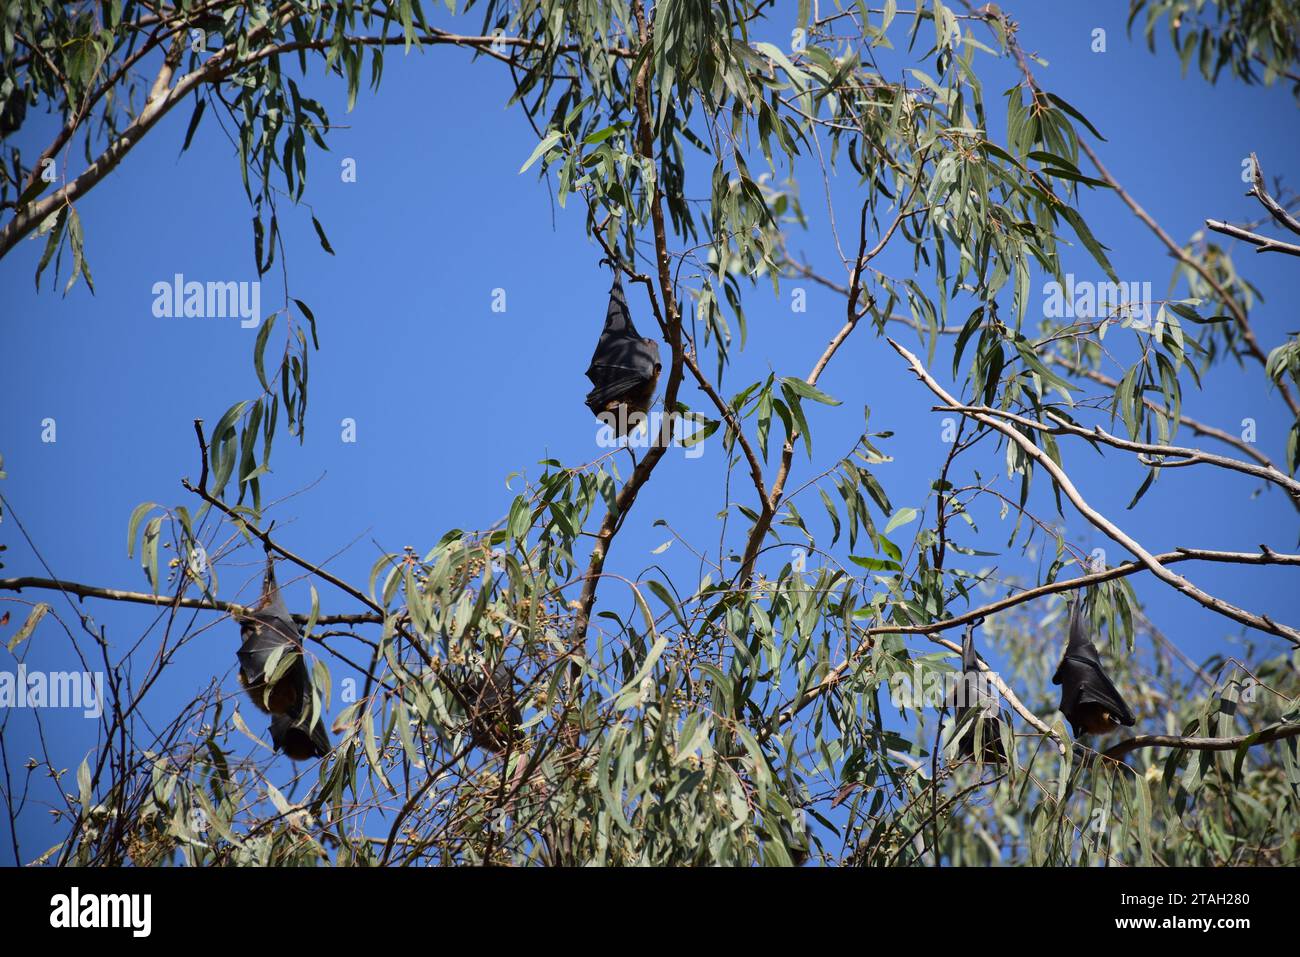 Indian flying foxes (anso known as Pteropus medius) hanging on a tree in daytime on the way to Jodhpur, Rajasthan - India Stock Photo